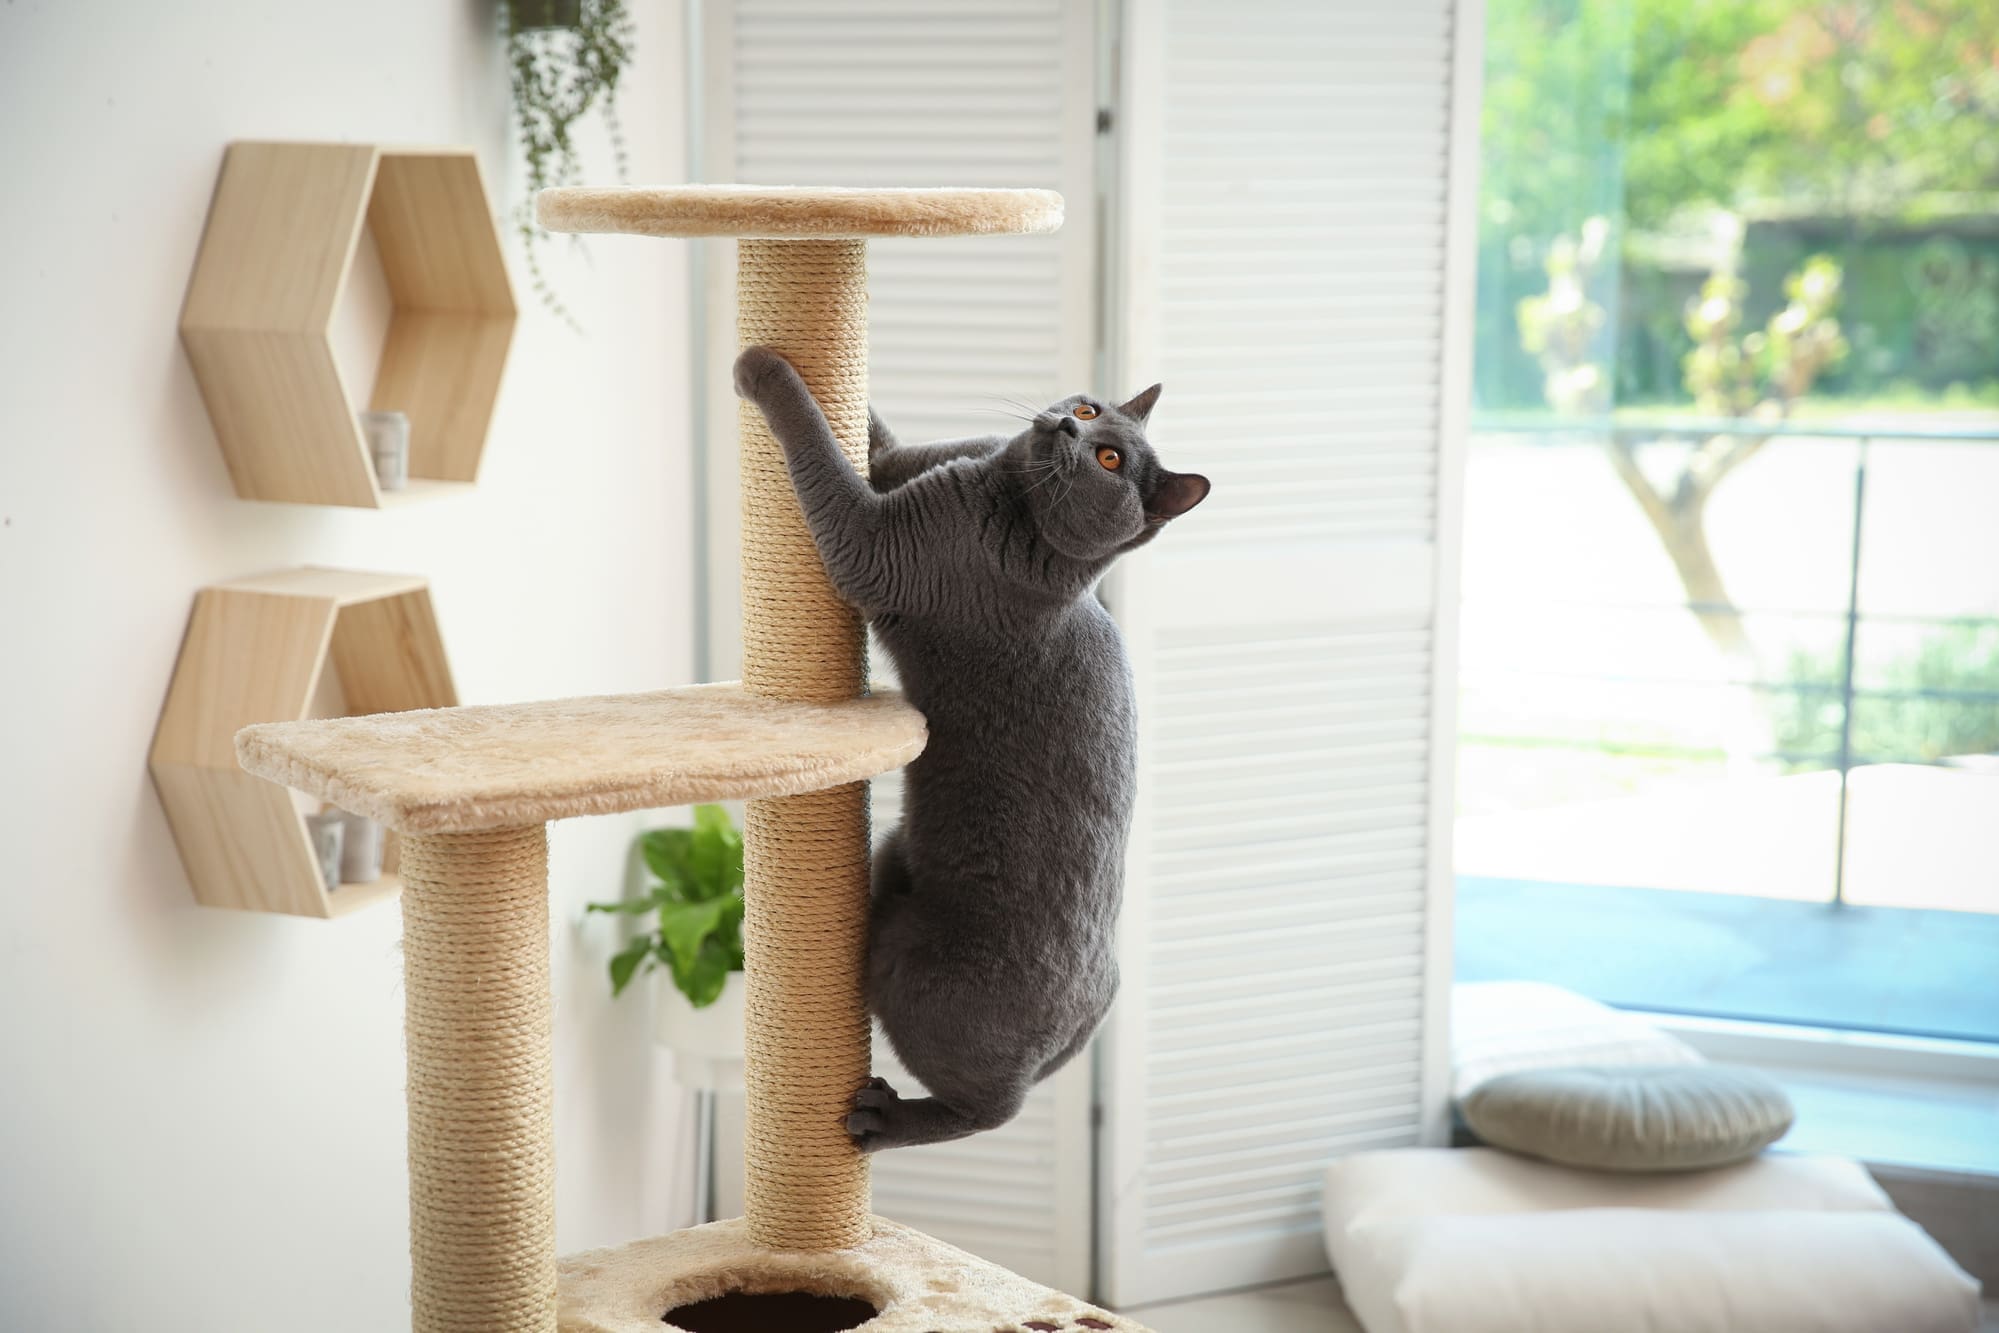 8 DIY Pet Projects: Crafting and Building for Your Furry Friend